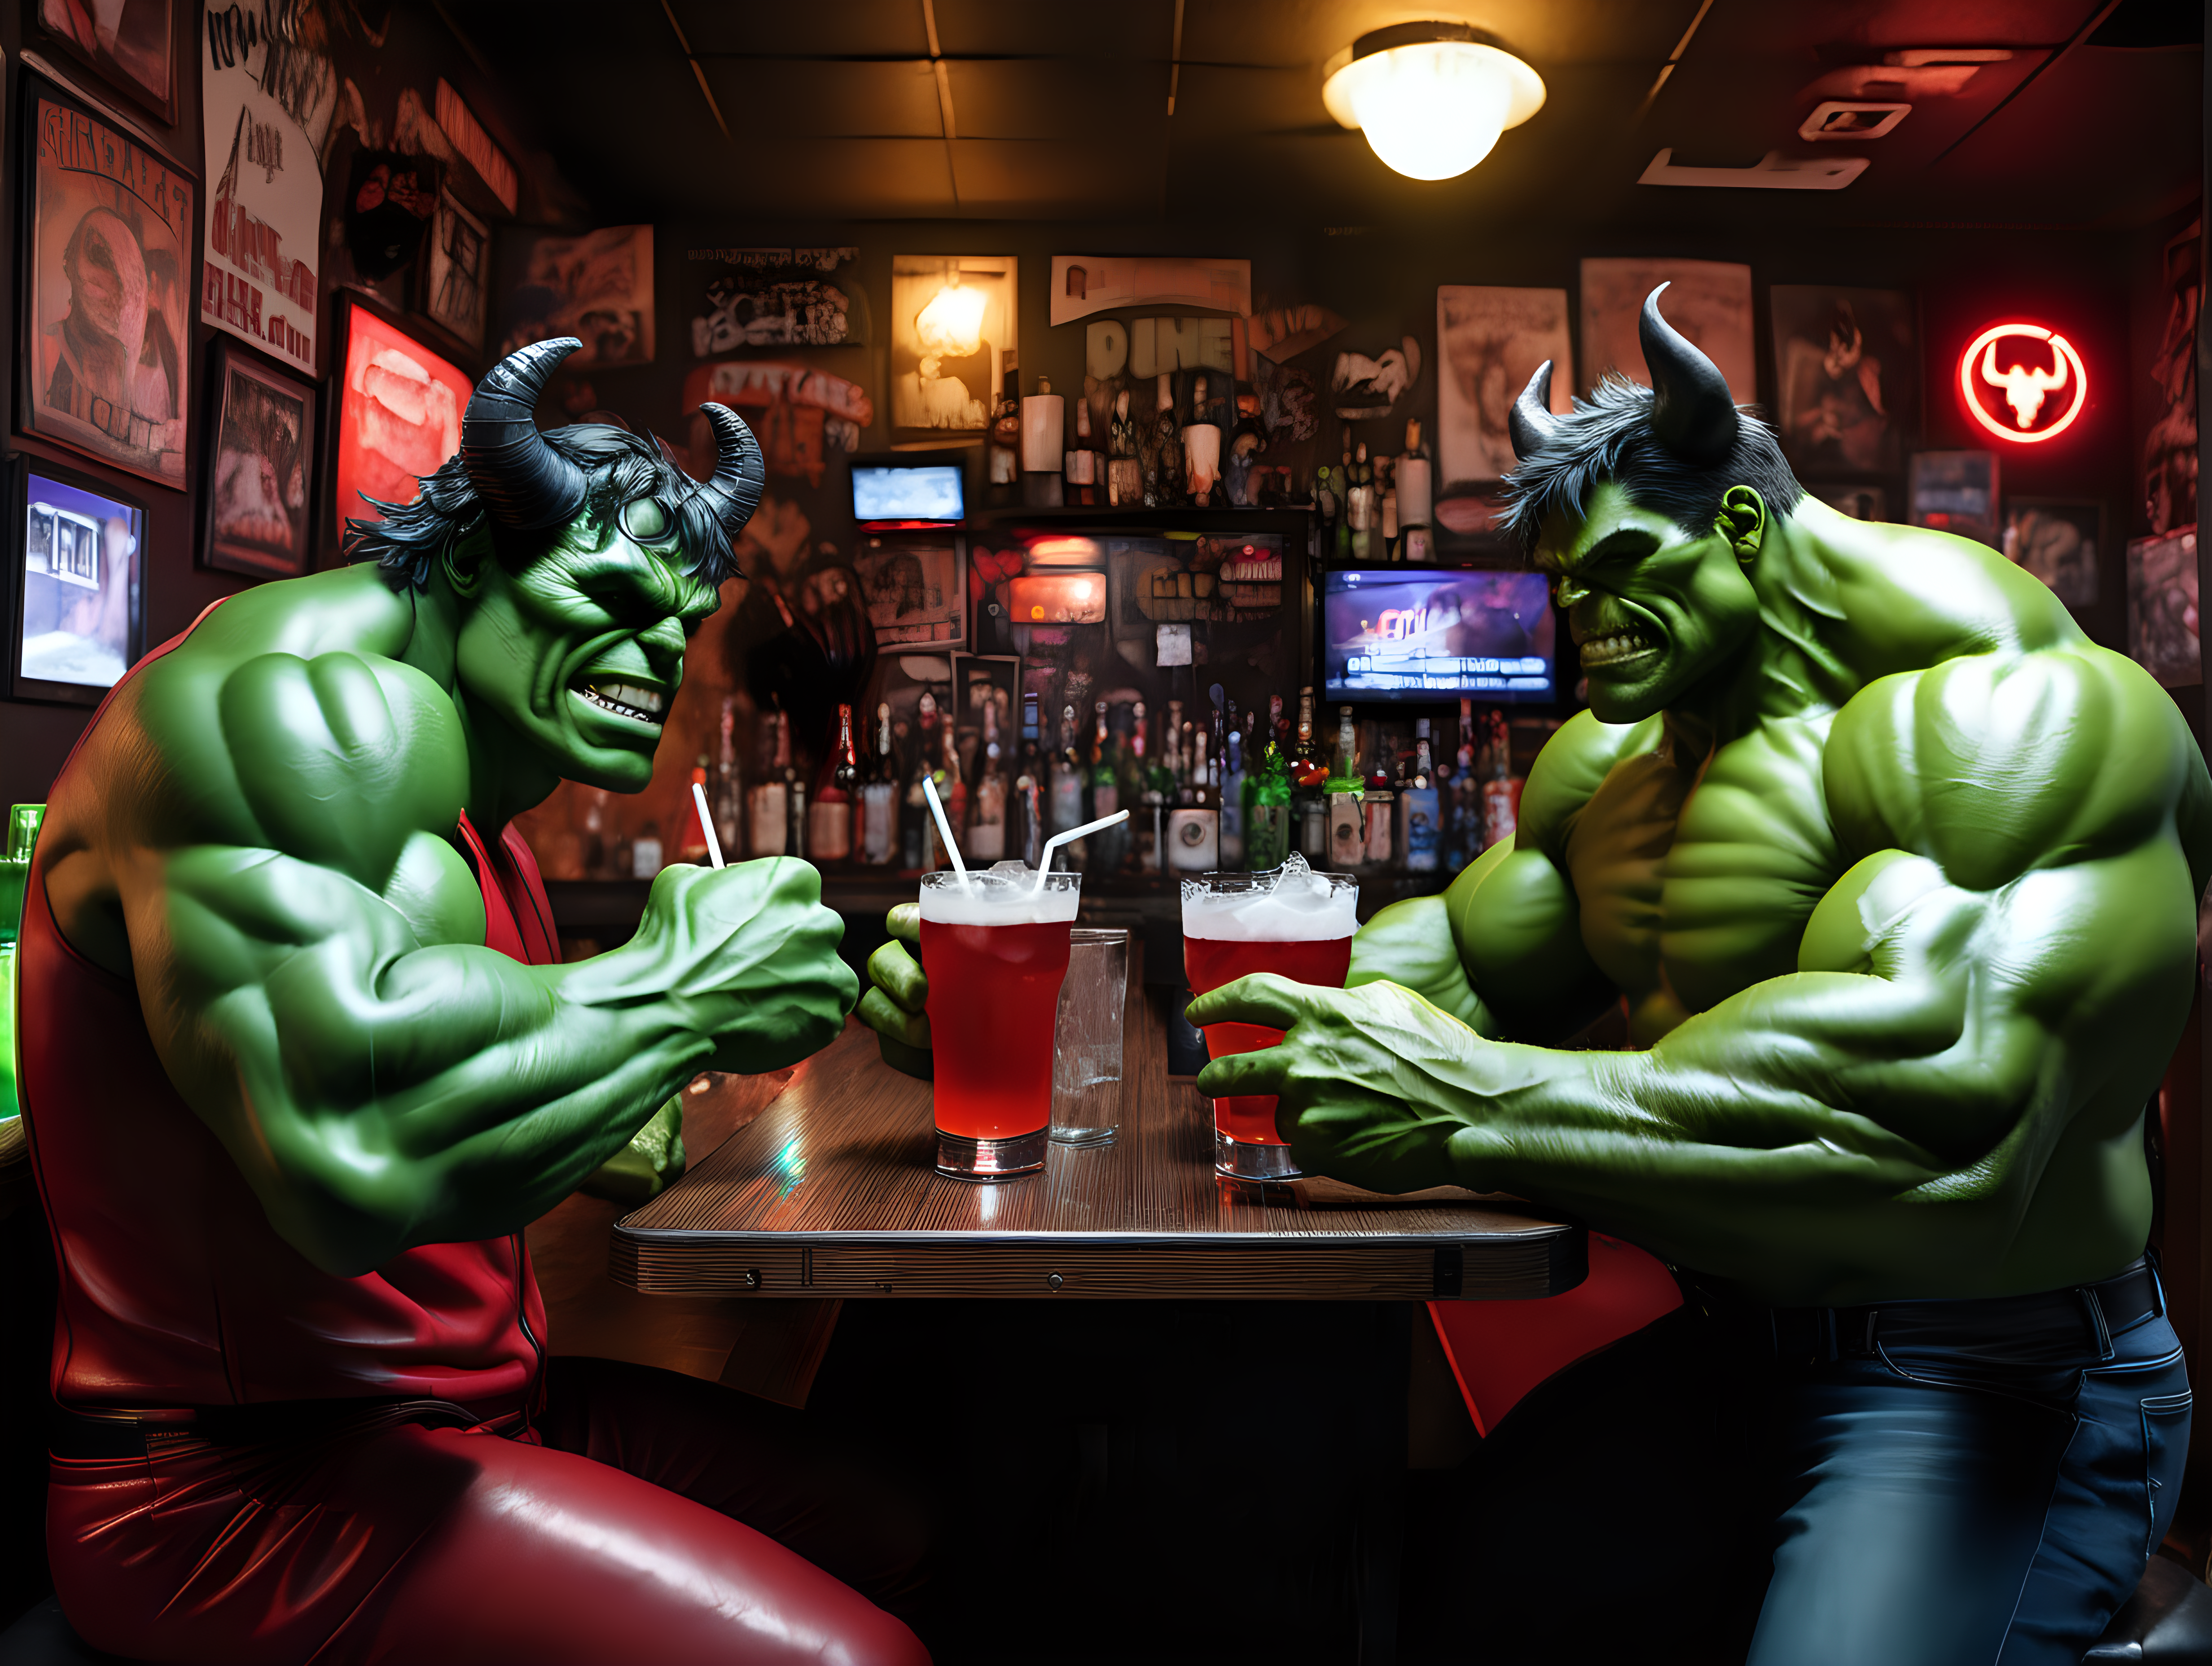 Devil and Hulk have drinks in a dive